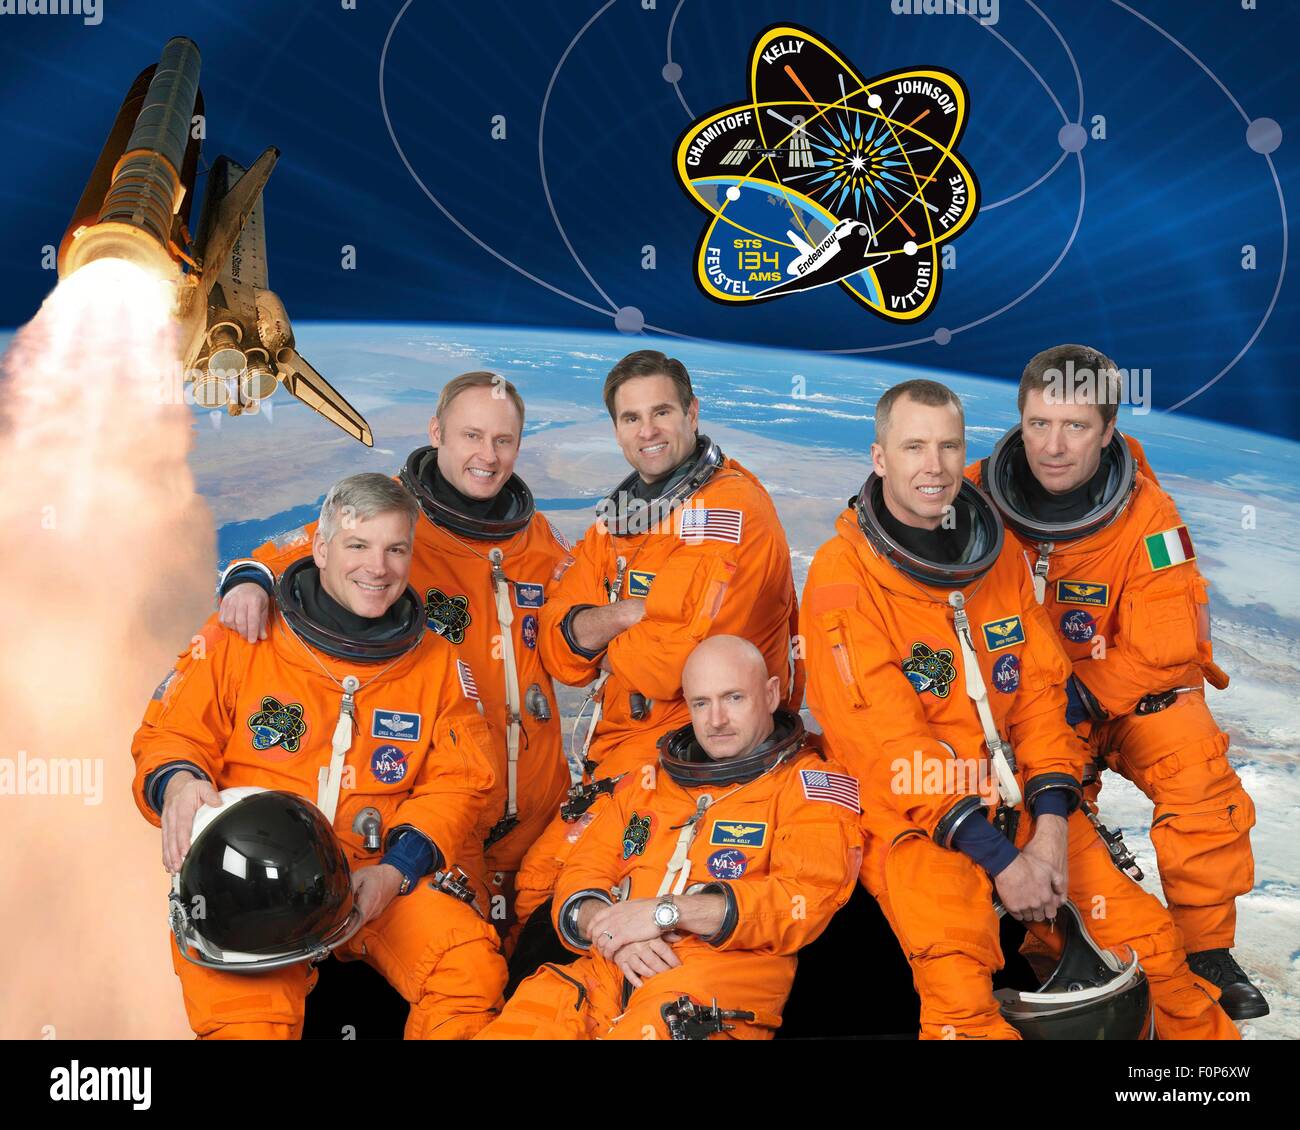 Group portrait of the STS-134 space shuttle crew astronauts in launch-and-entry suits are Mark Kelly (bottom center), commander; Gregory H. Johnson, pilot; Michael Fincke, Greg Chamitoff, Andrew Feustel and European Space Agency's Roberto Vittori at the Johnson Space Center January 1, 2010 in Houston, Texas. Stock Photo